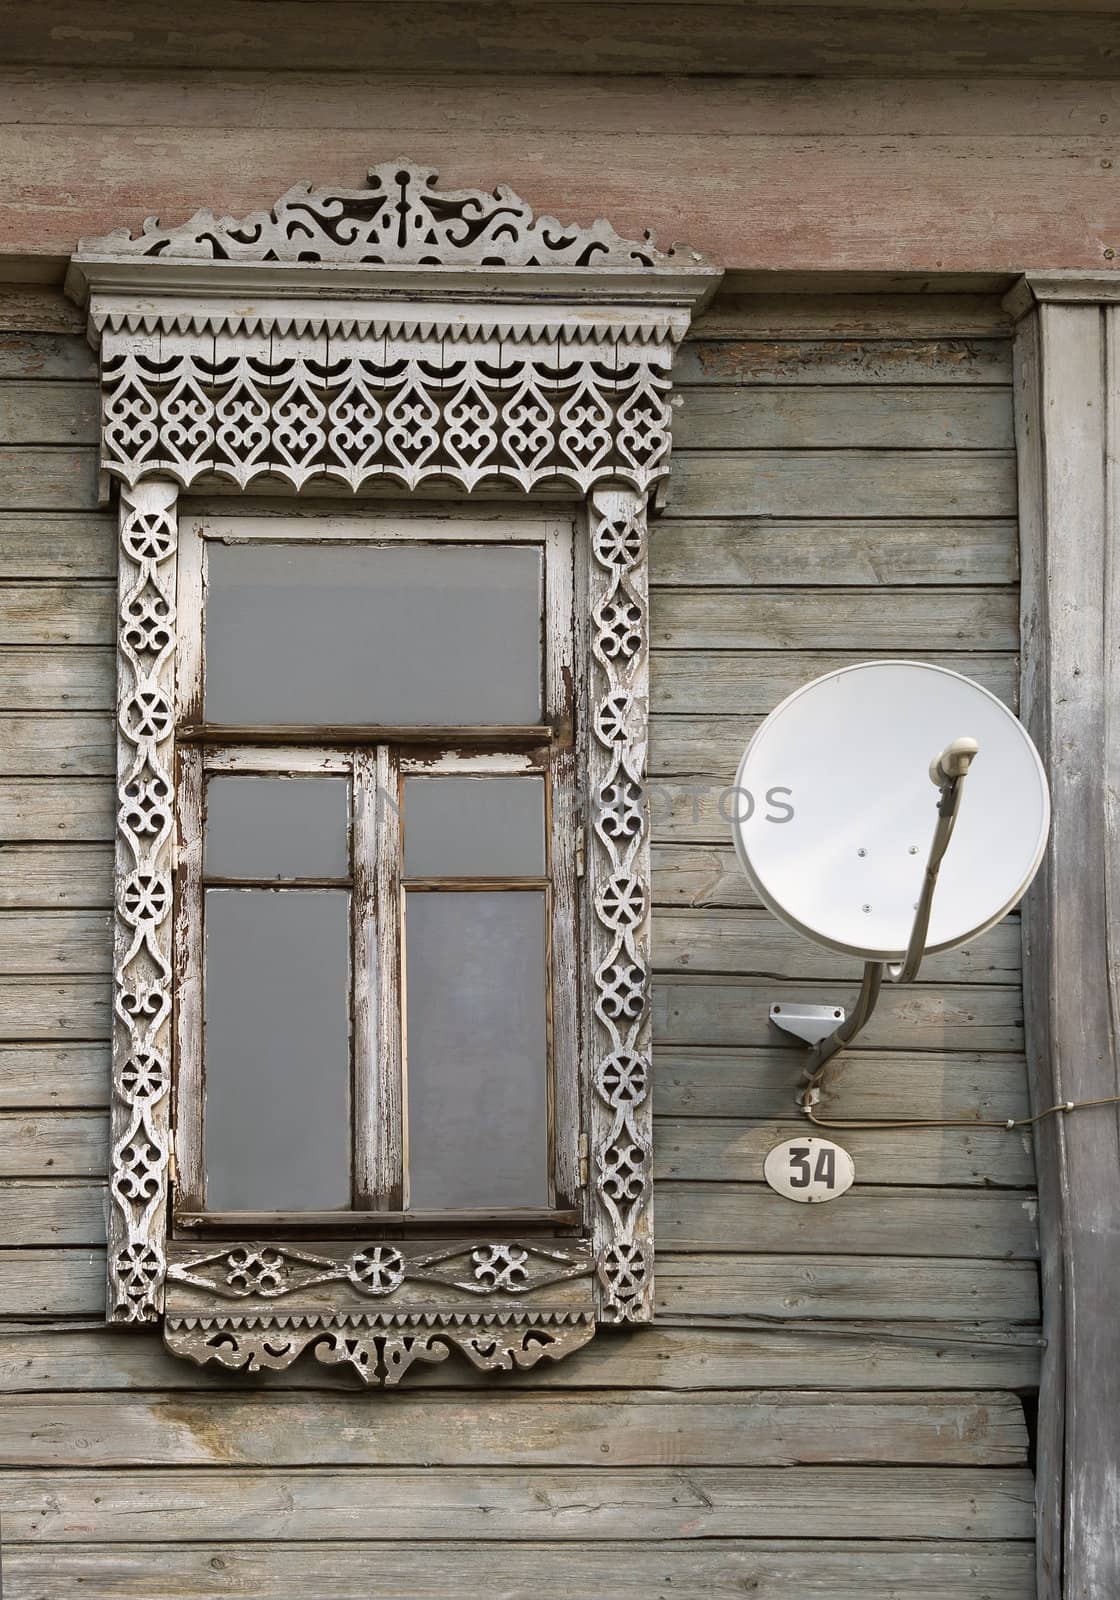 Window of an old russian house and satellite dish